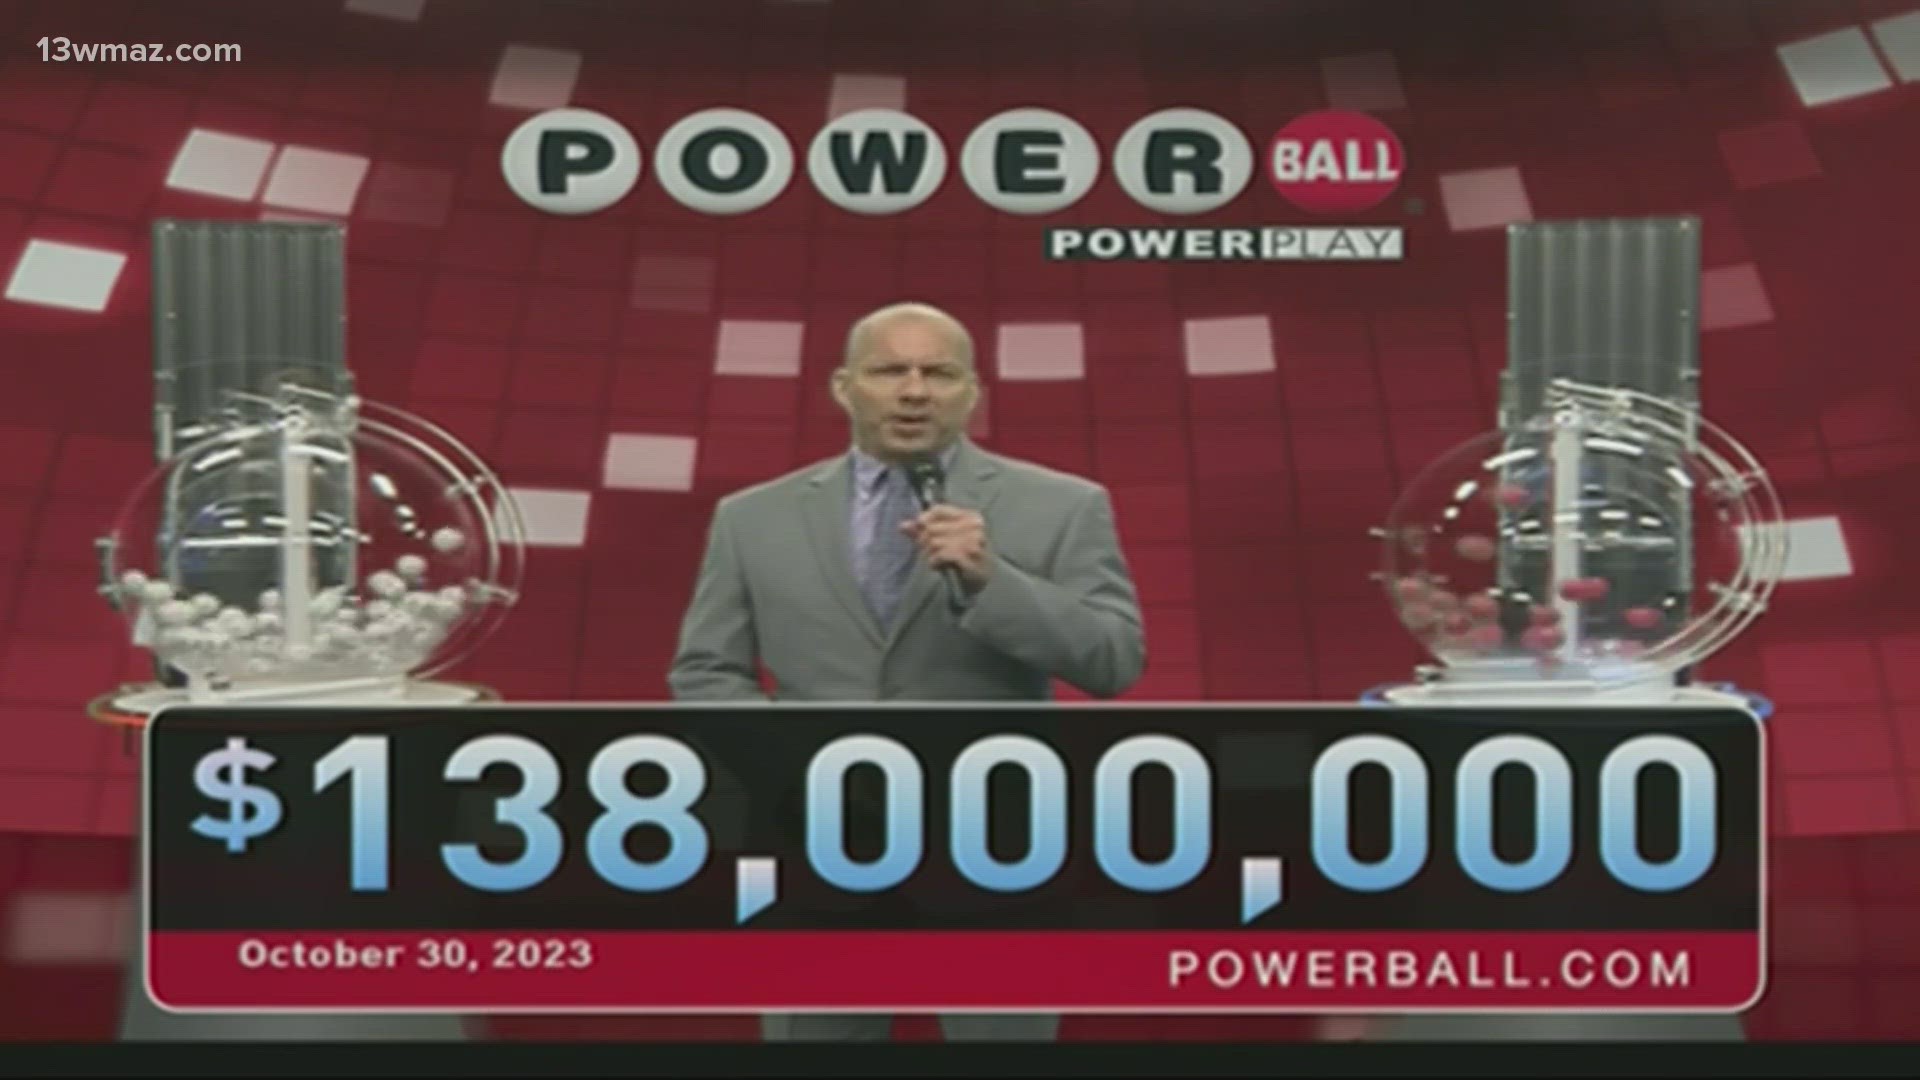 Here are your winning Powerball numbers for Oct. 30, 2023. What would you do with that jackpot?